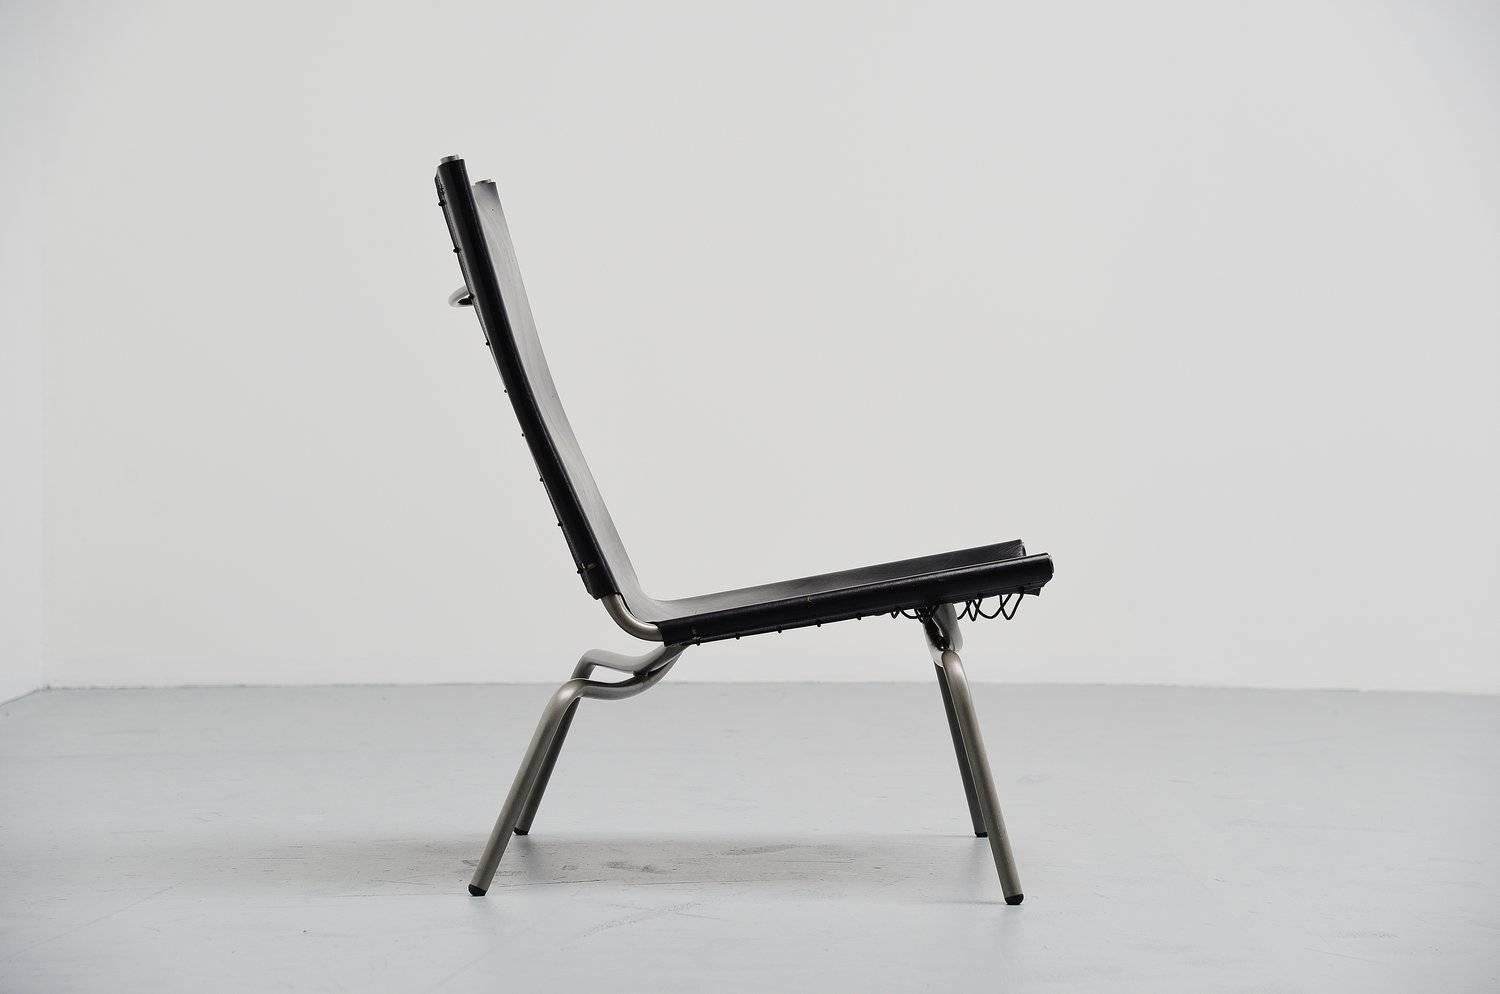 Very nice early example of the crossed legs chair designed by Fabiaan van Severen in his own atelier, Belgium 1998. This chair was purchased very short after the release of this chair in 1998, so a very early production. The chair has a grey coated